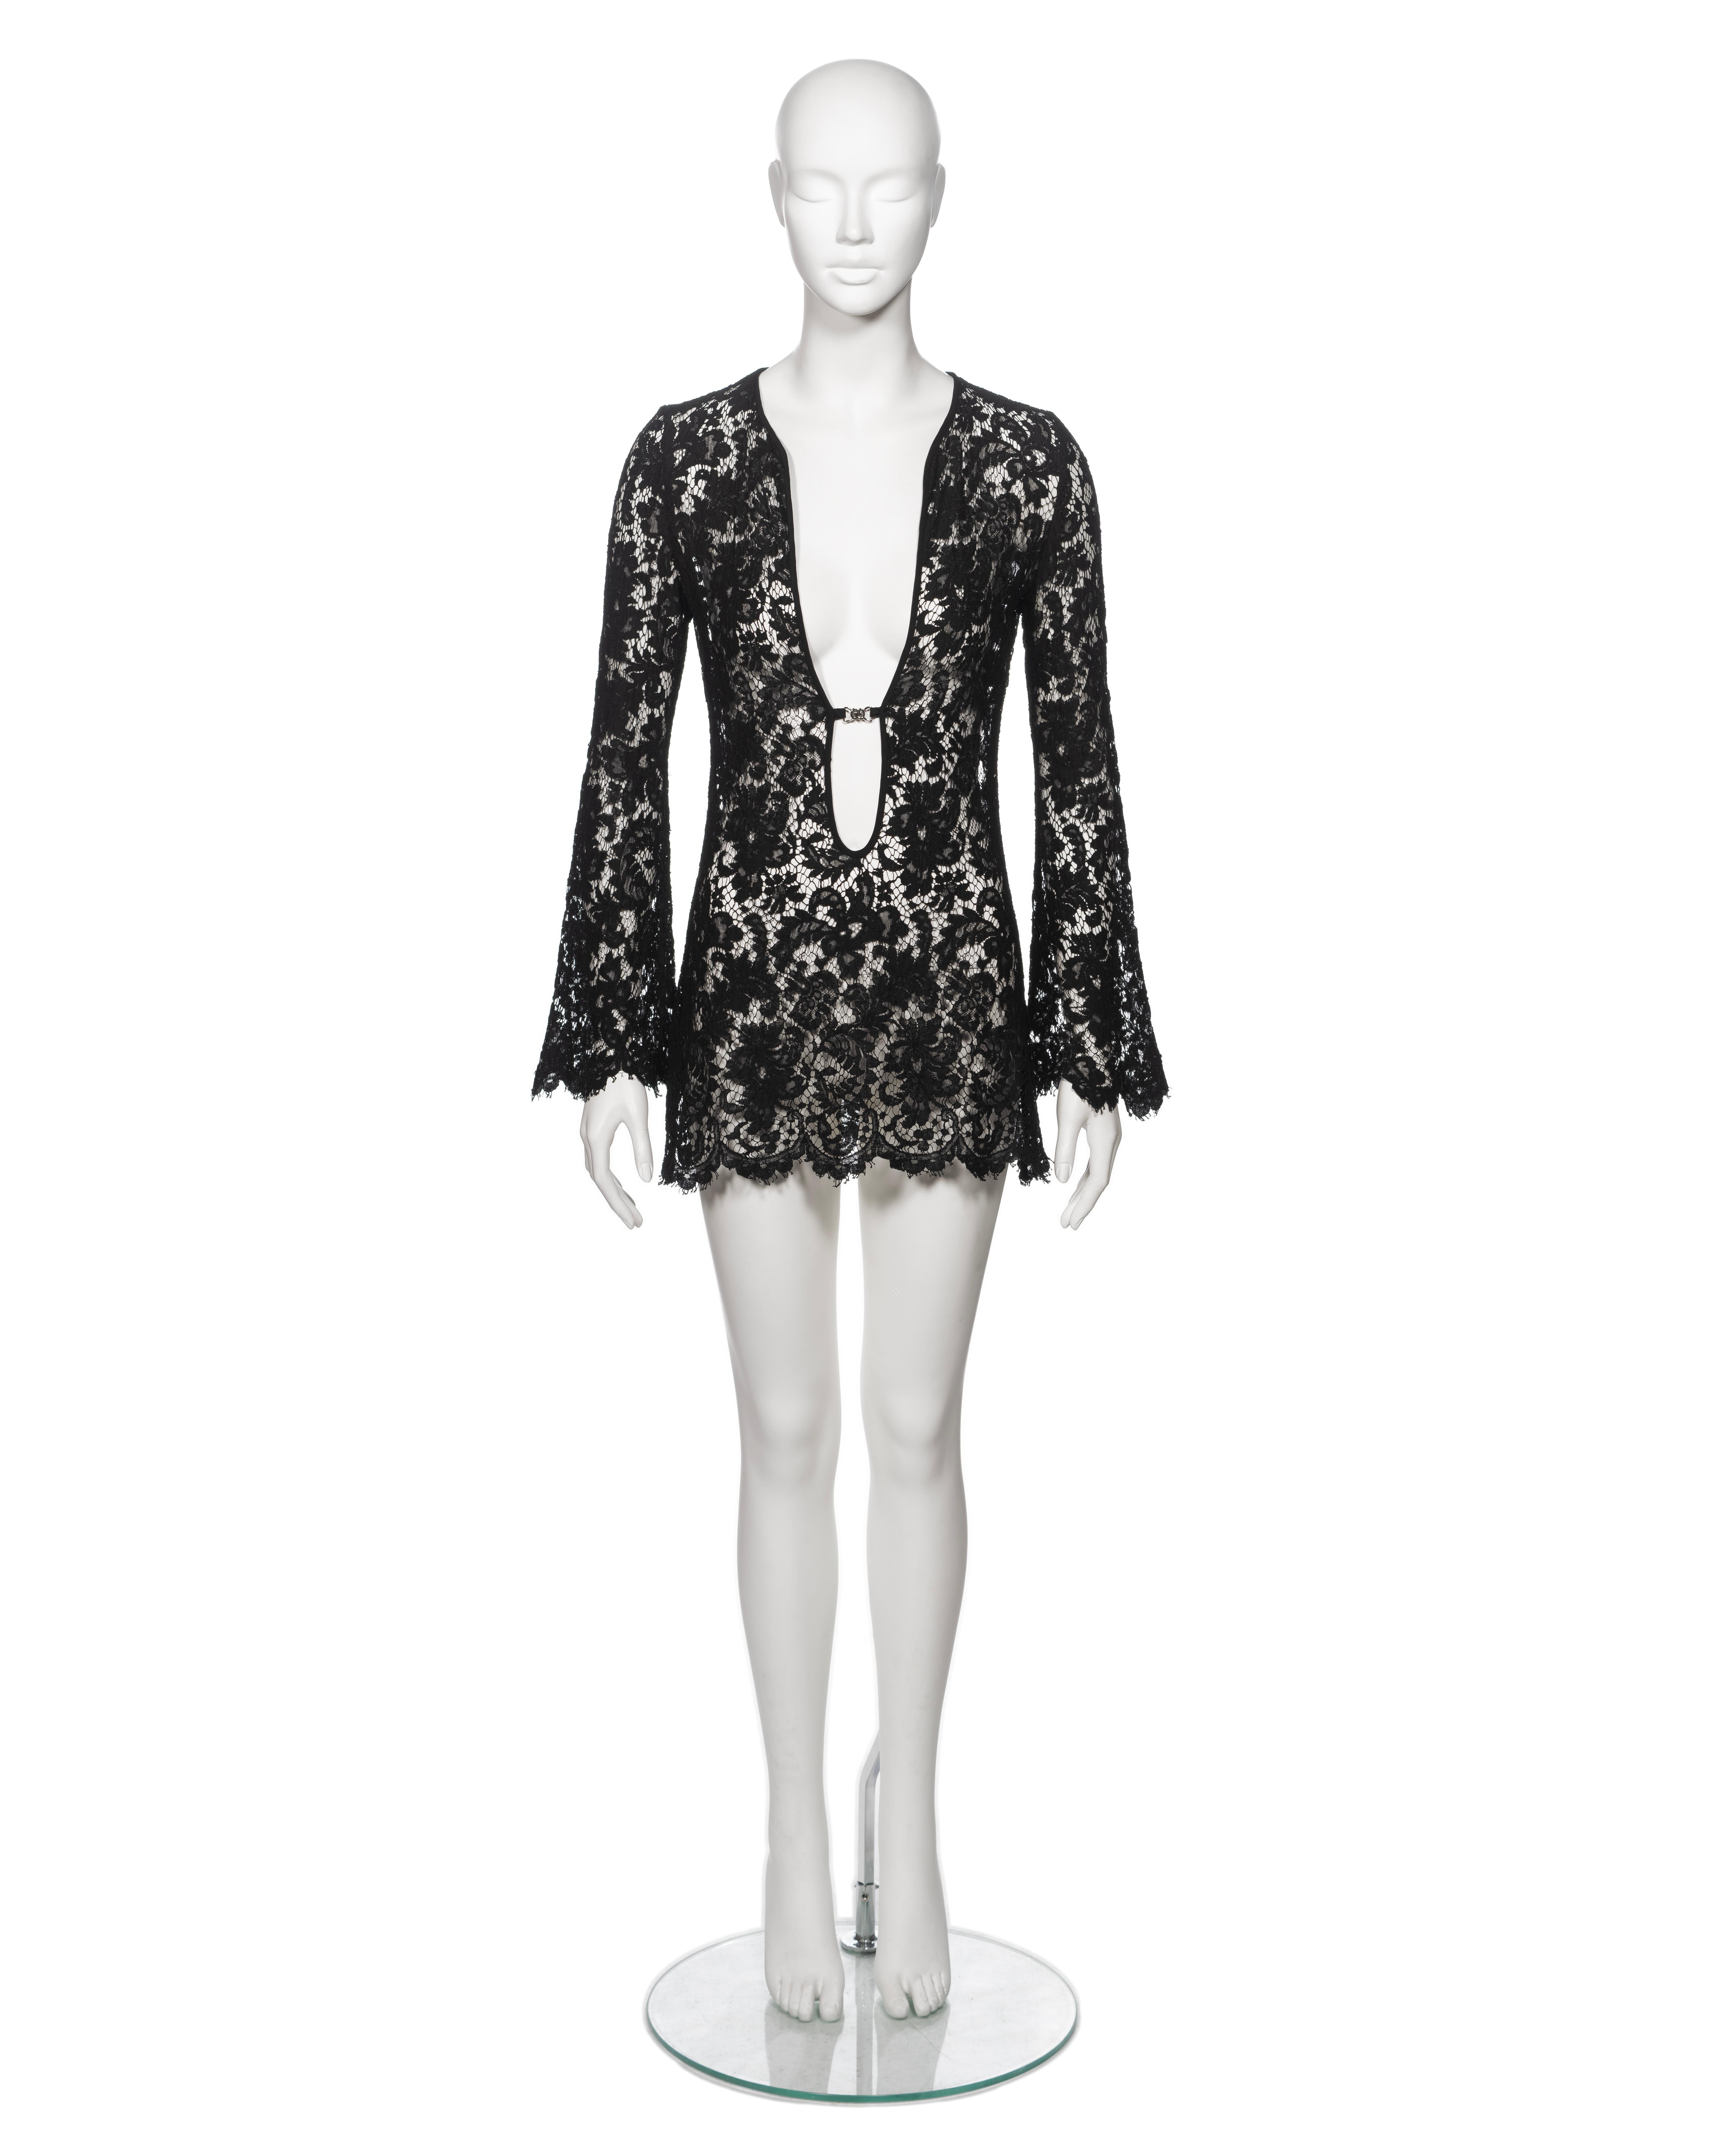 Women's Gucci by Tom Ford Black Lace Long Sleeve Micro Mini Dress, SS 1996 For Sale